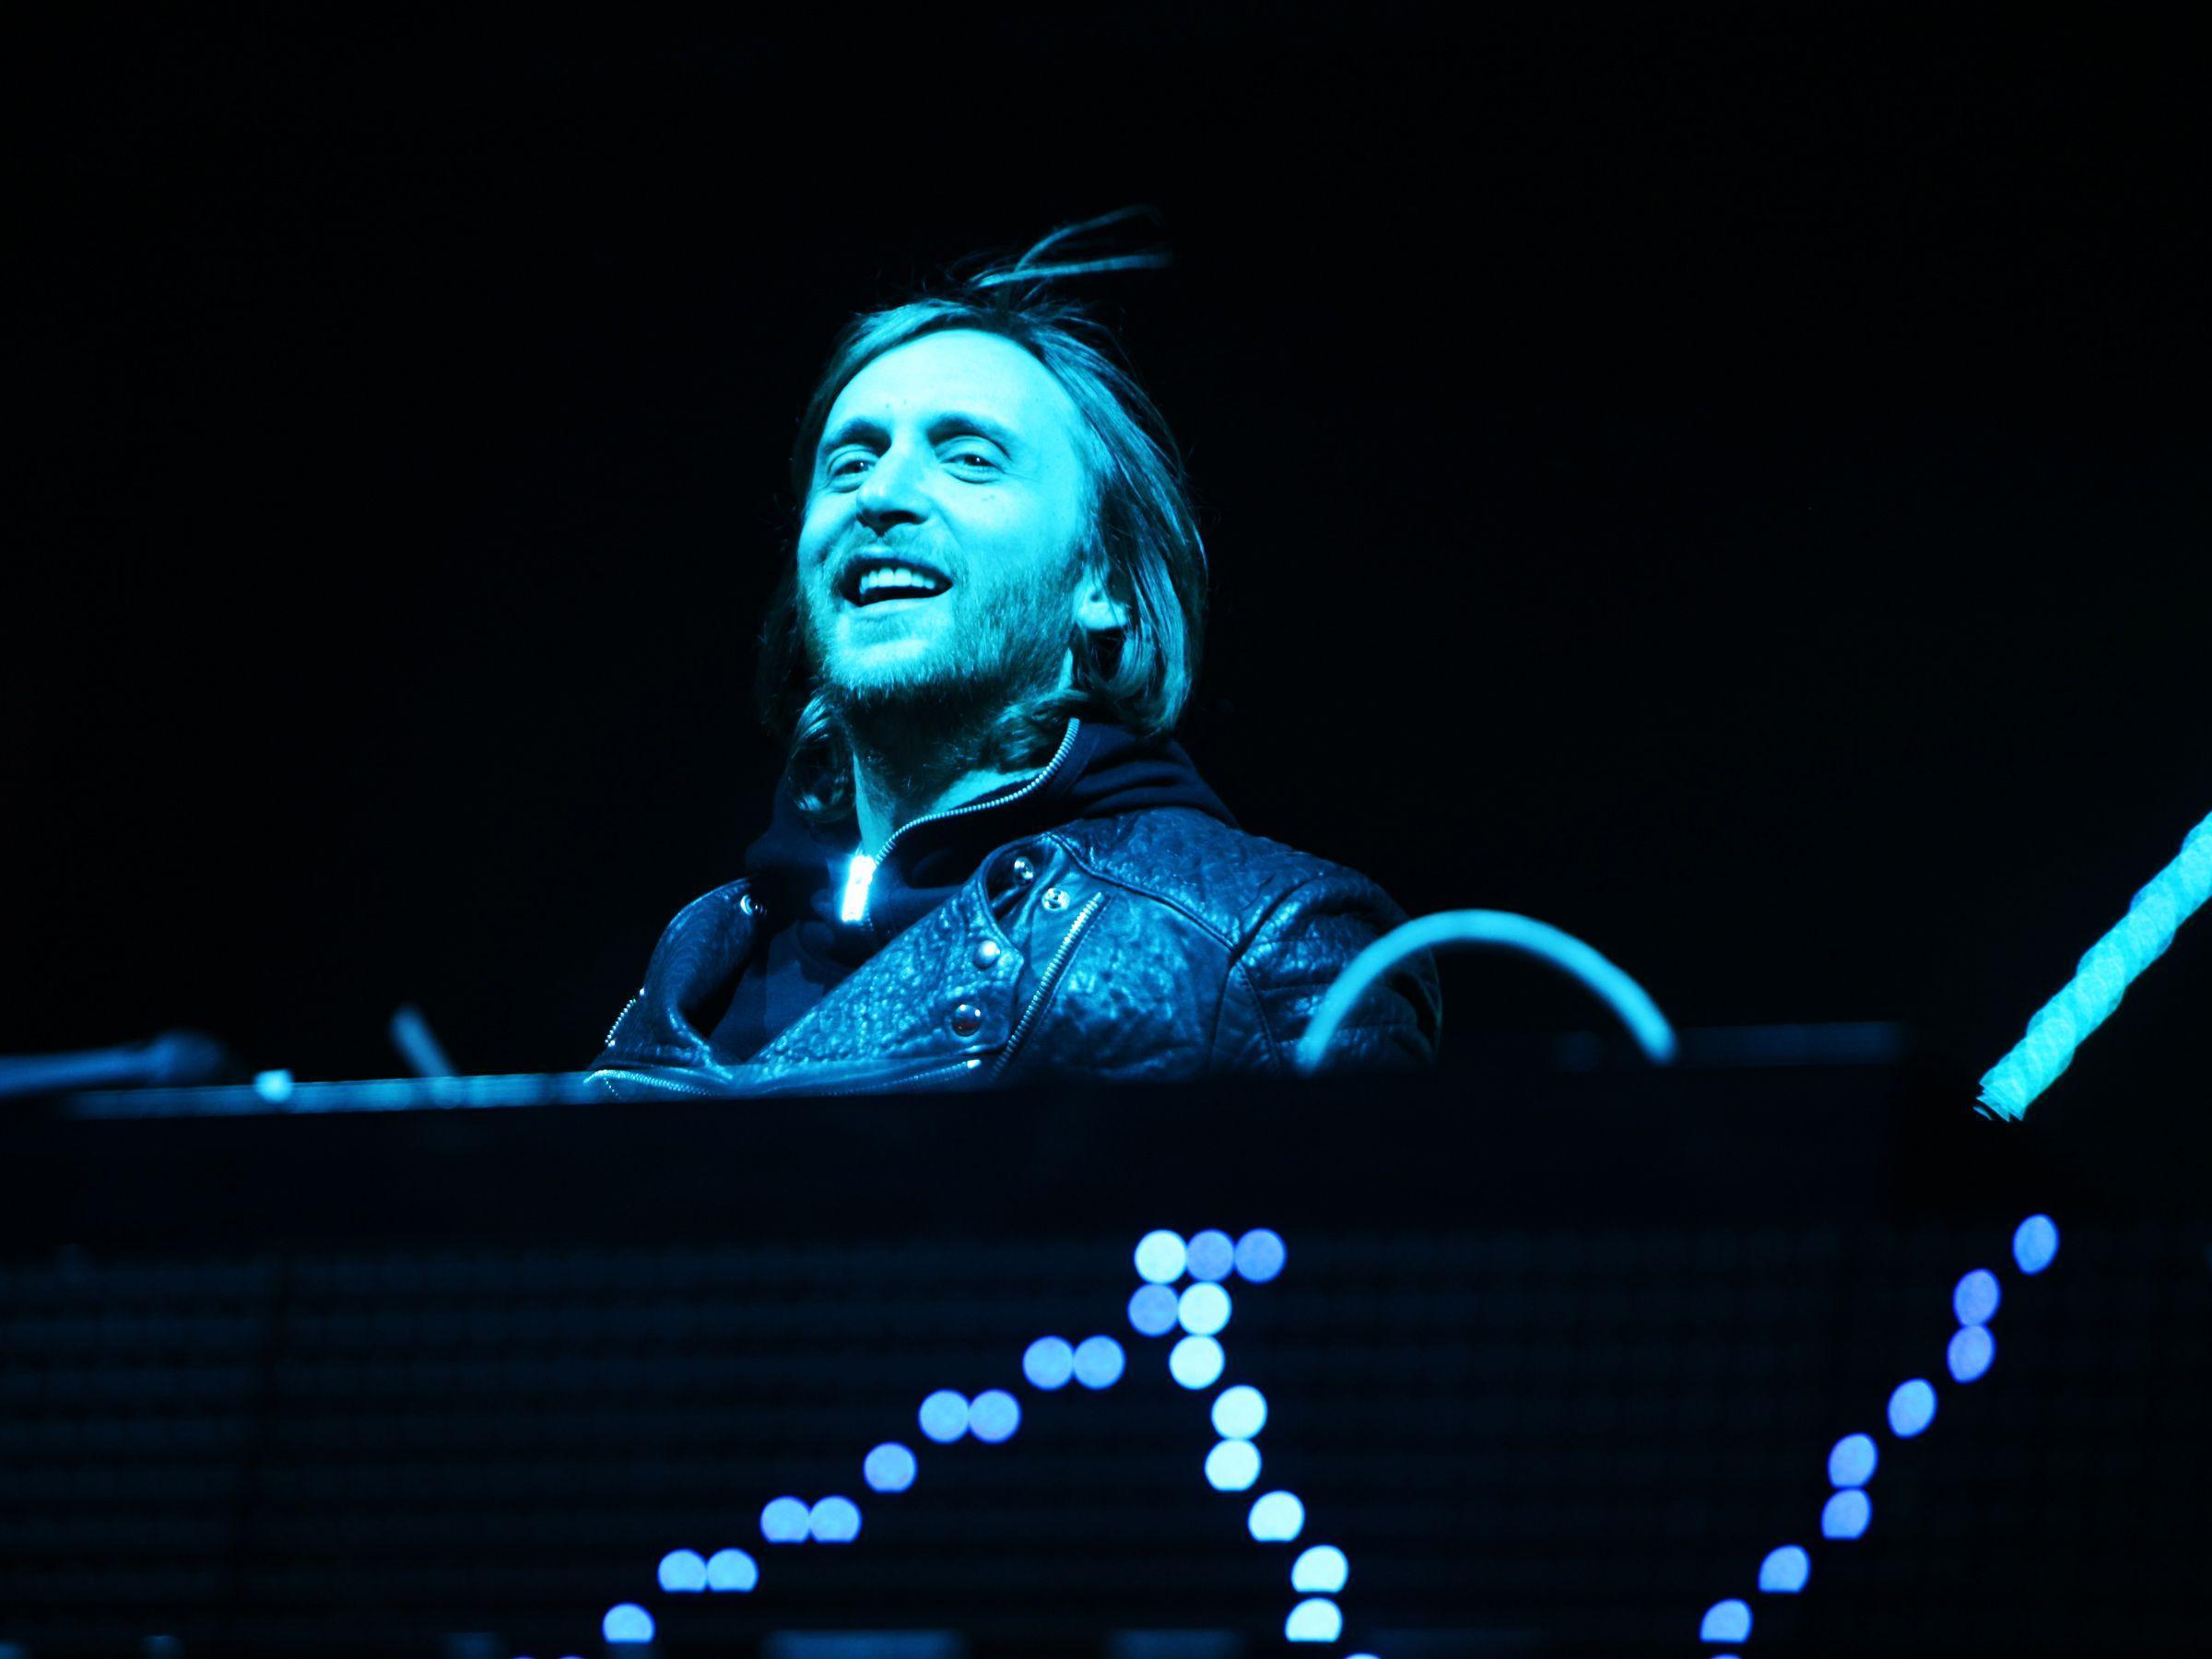 David Guetta laughs wallpaper and image, picture